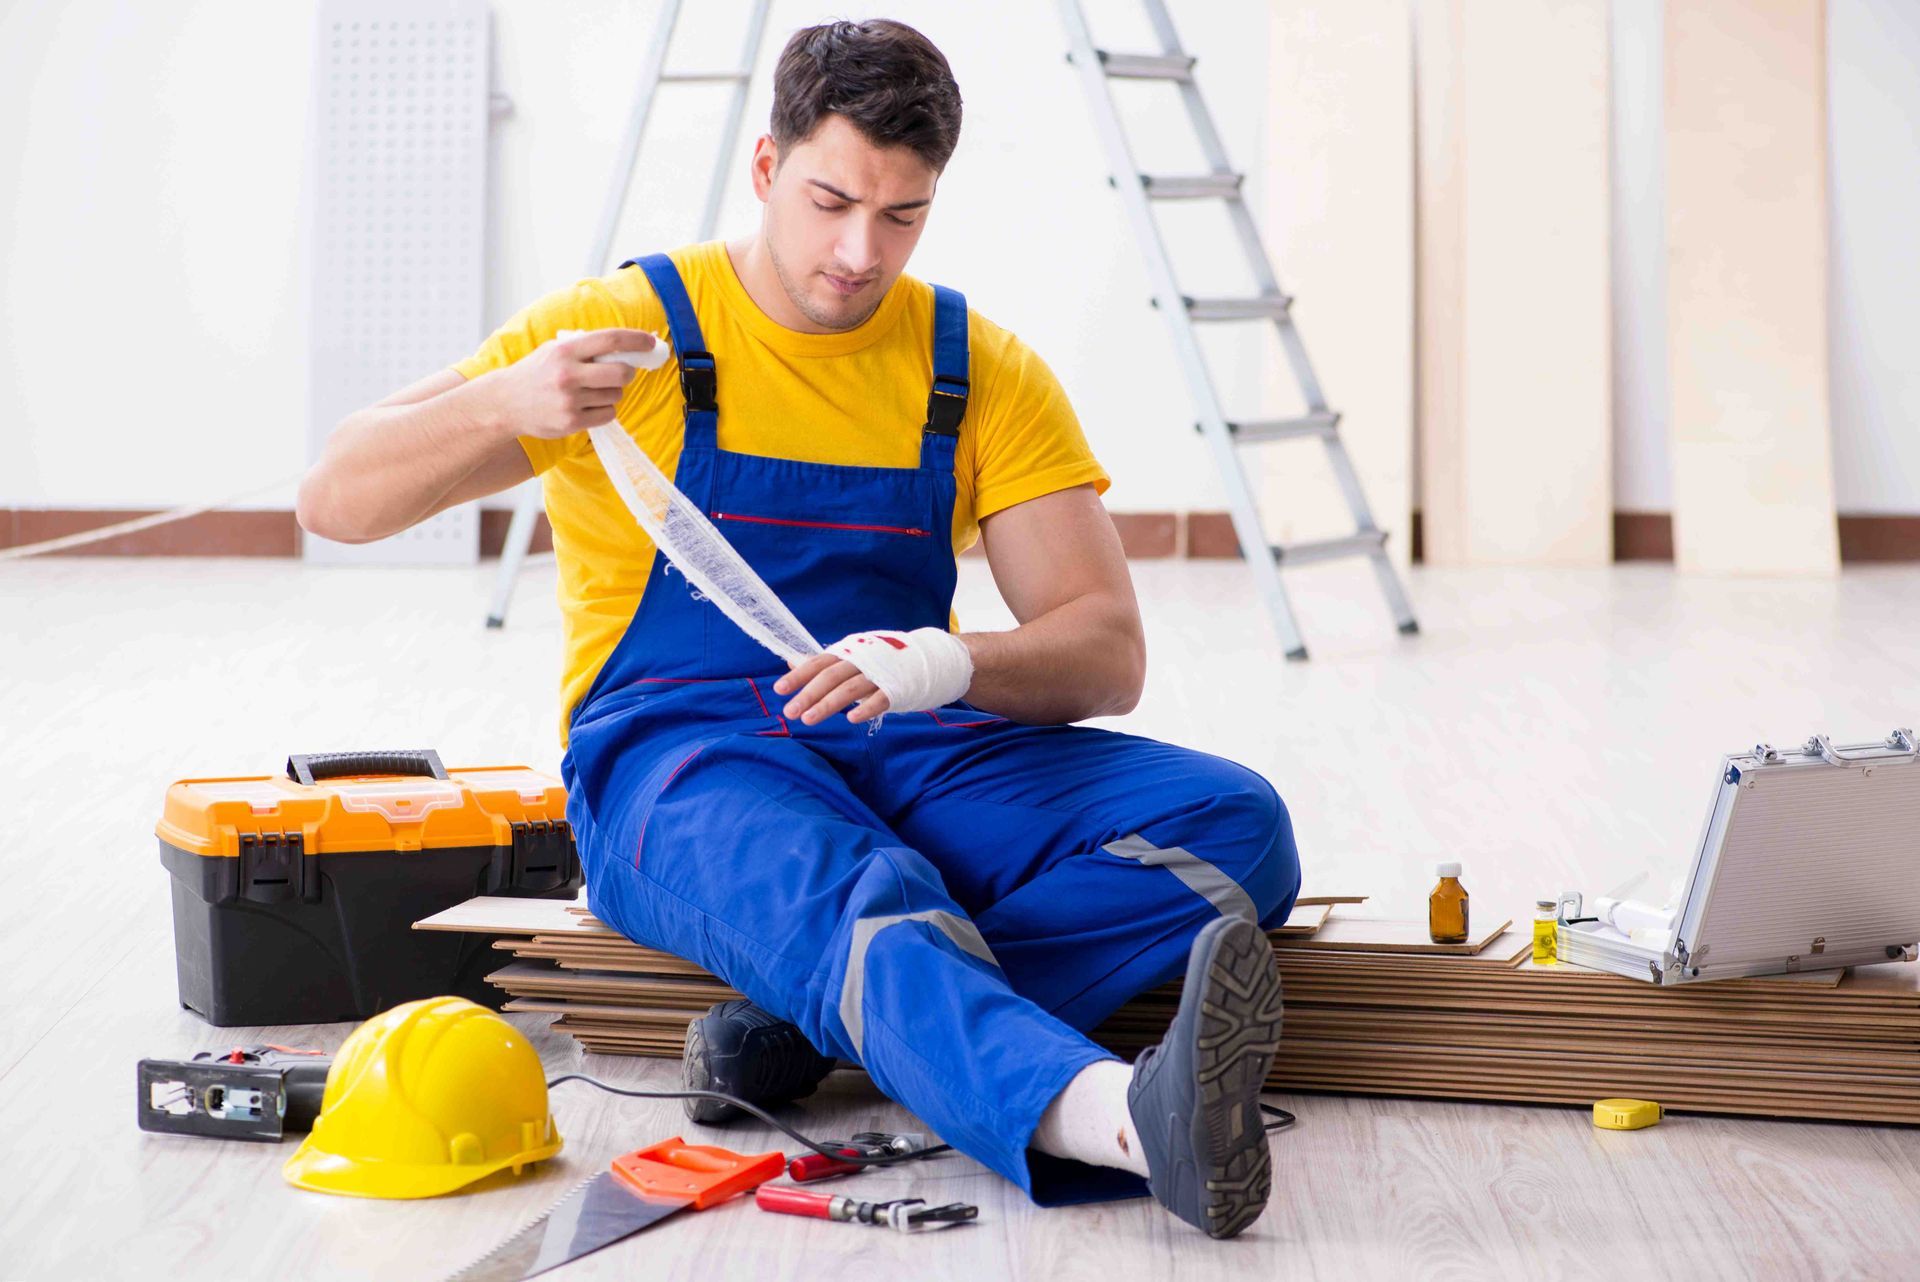 Workers Comp and Personal Injury Claim 